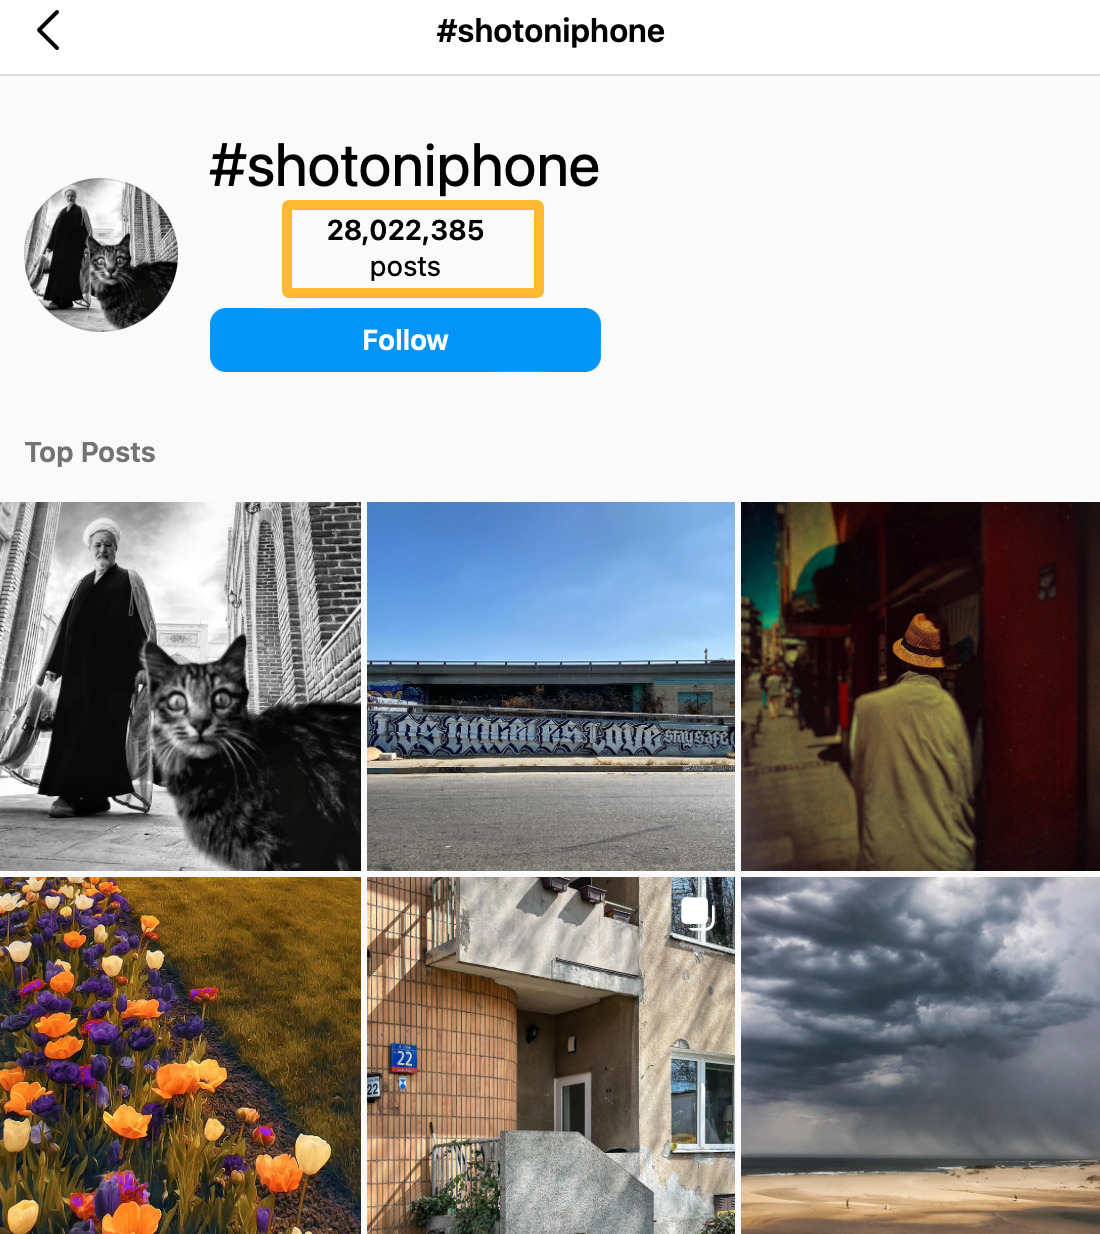 #shotoniphone marketing campaign results